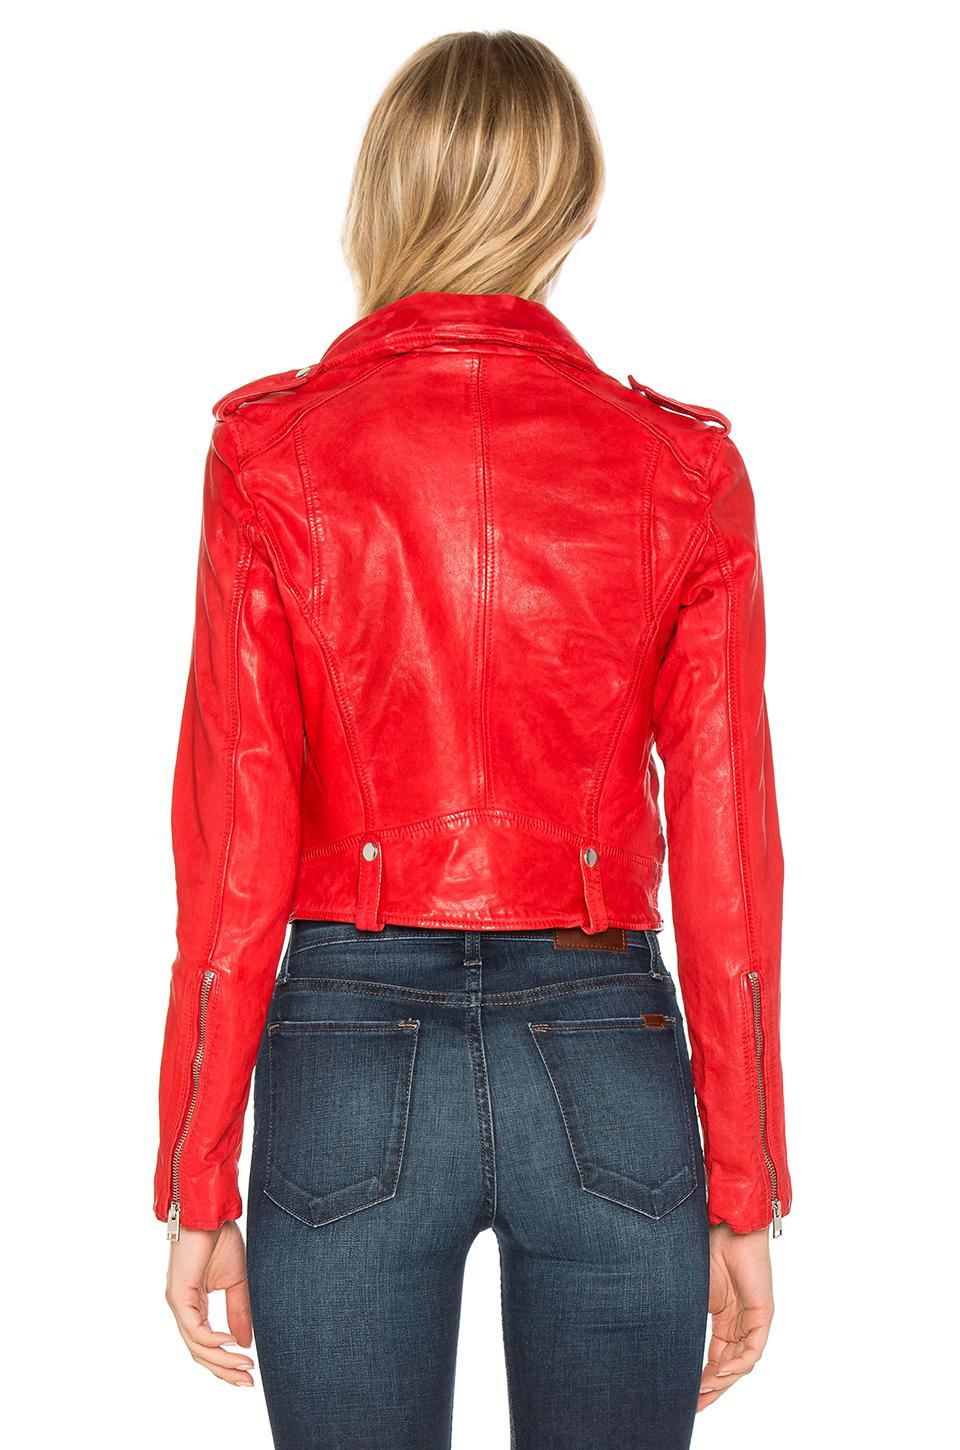 Lyst - Lamarque Ciara Jacket in Red